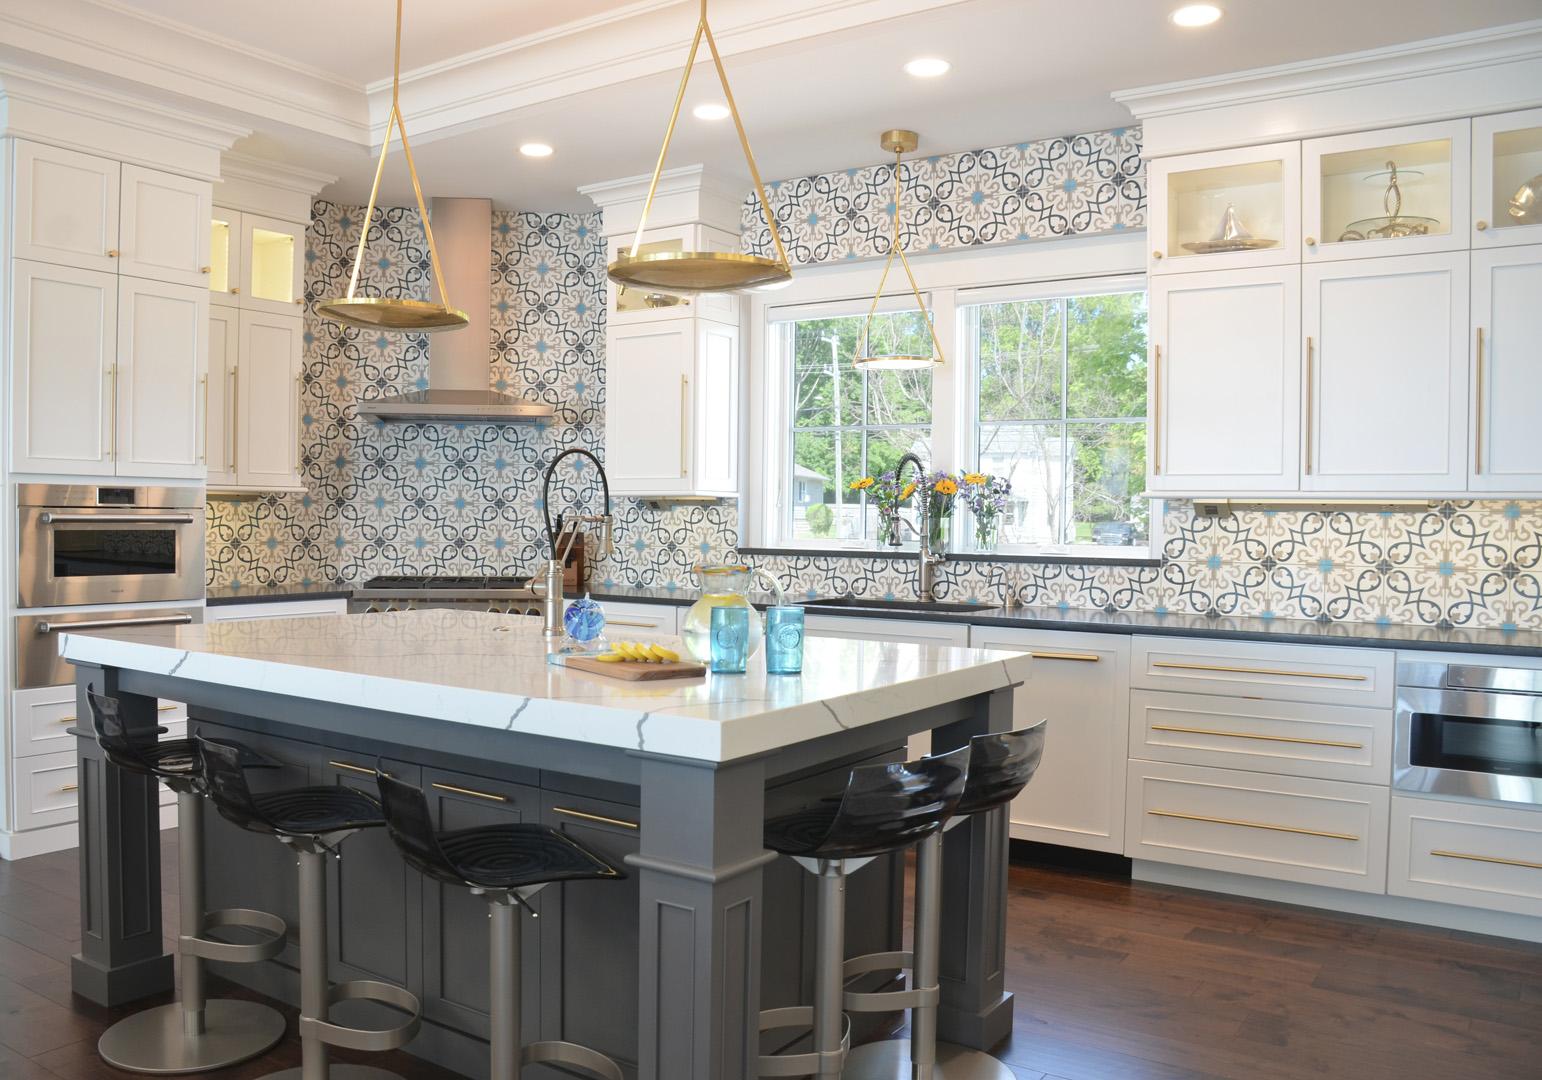 Lili Cement tiles in four custom colors  Jayme Keeling & Point One Architects 